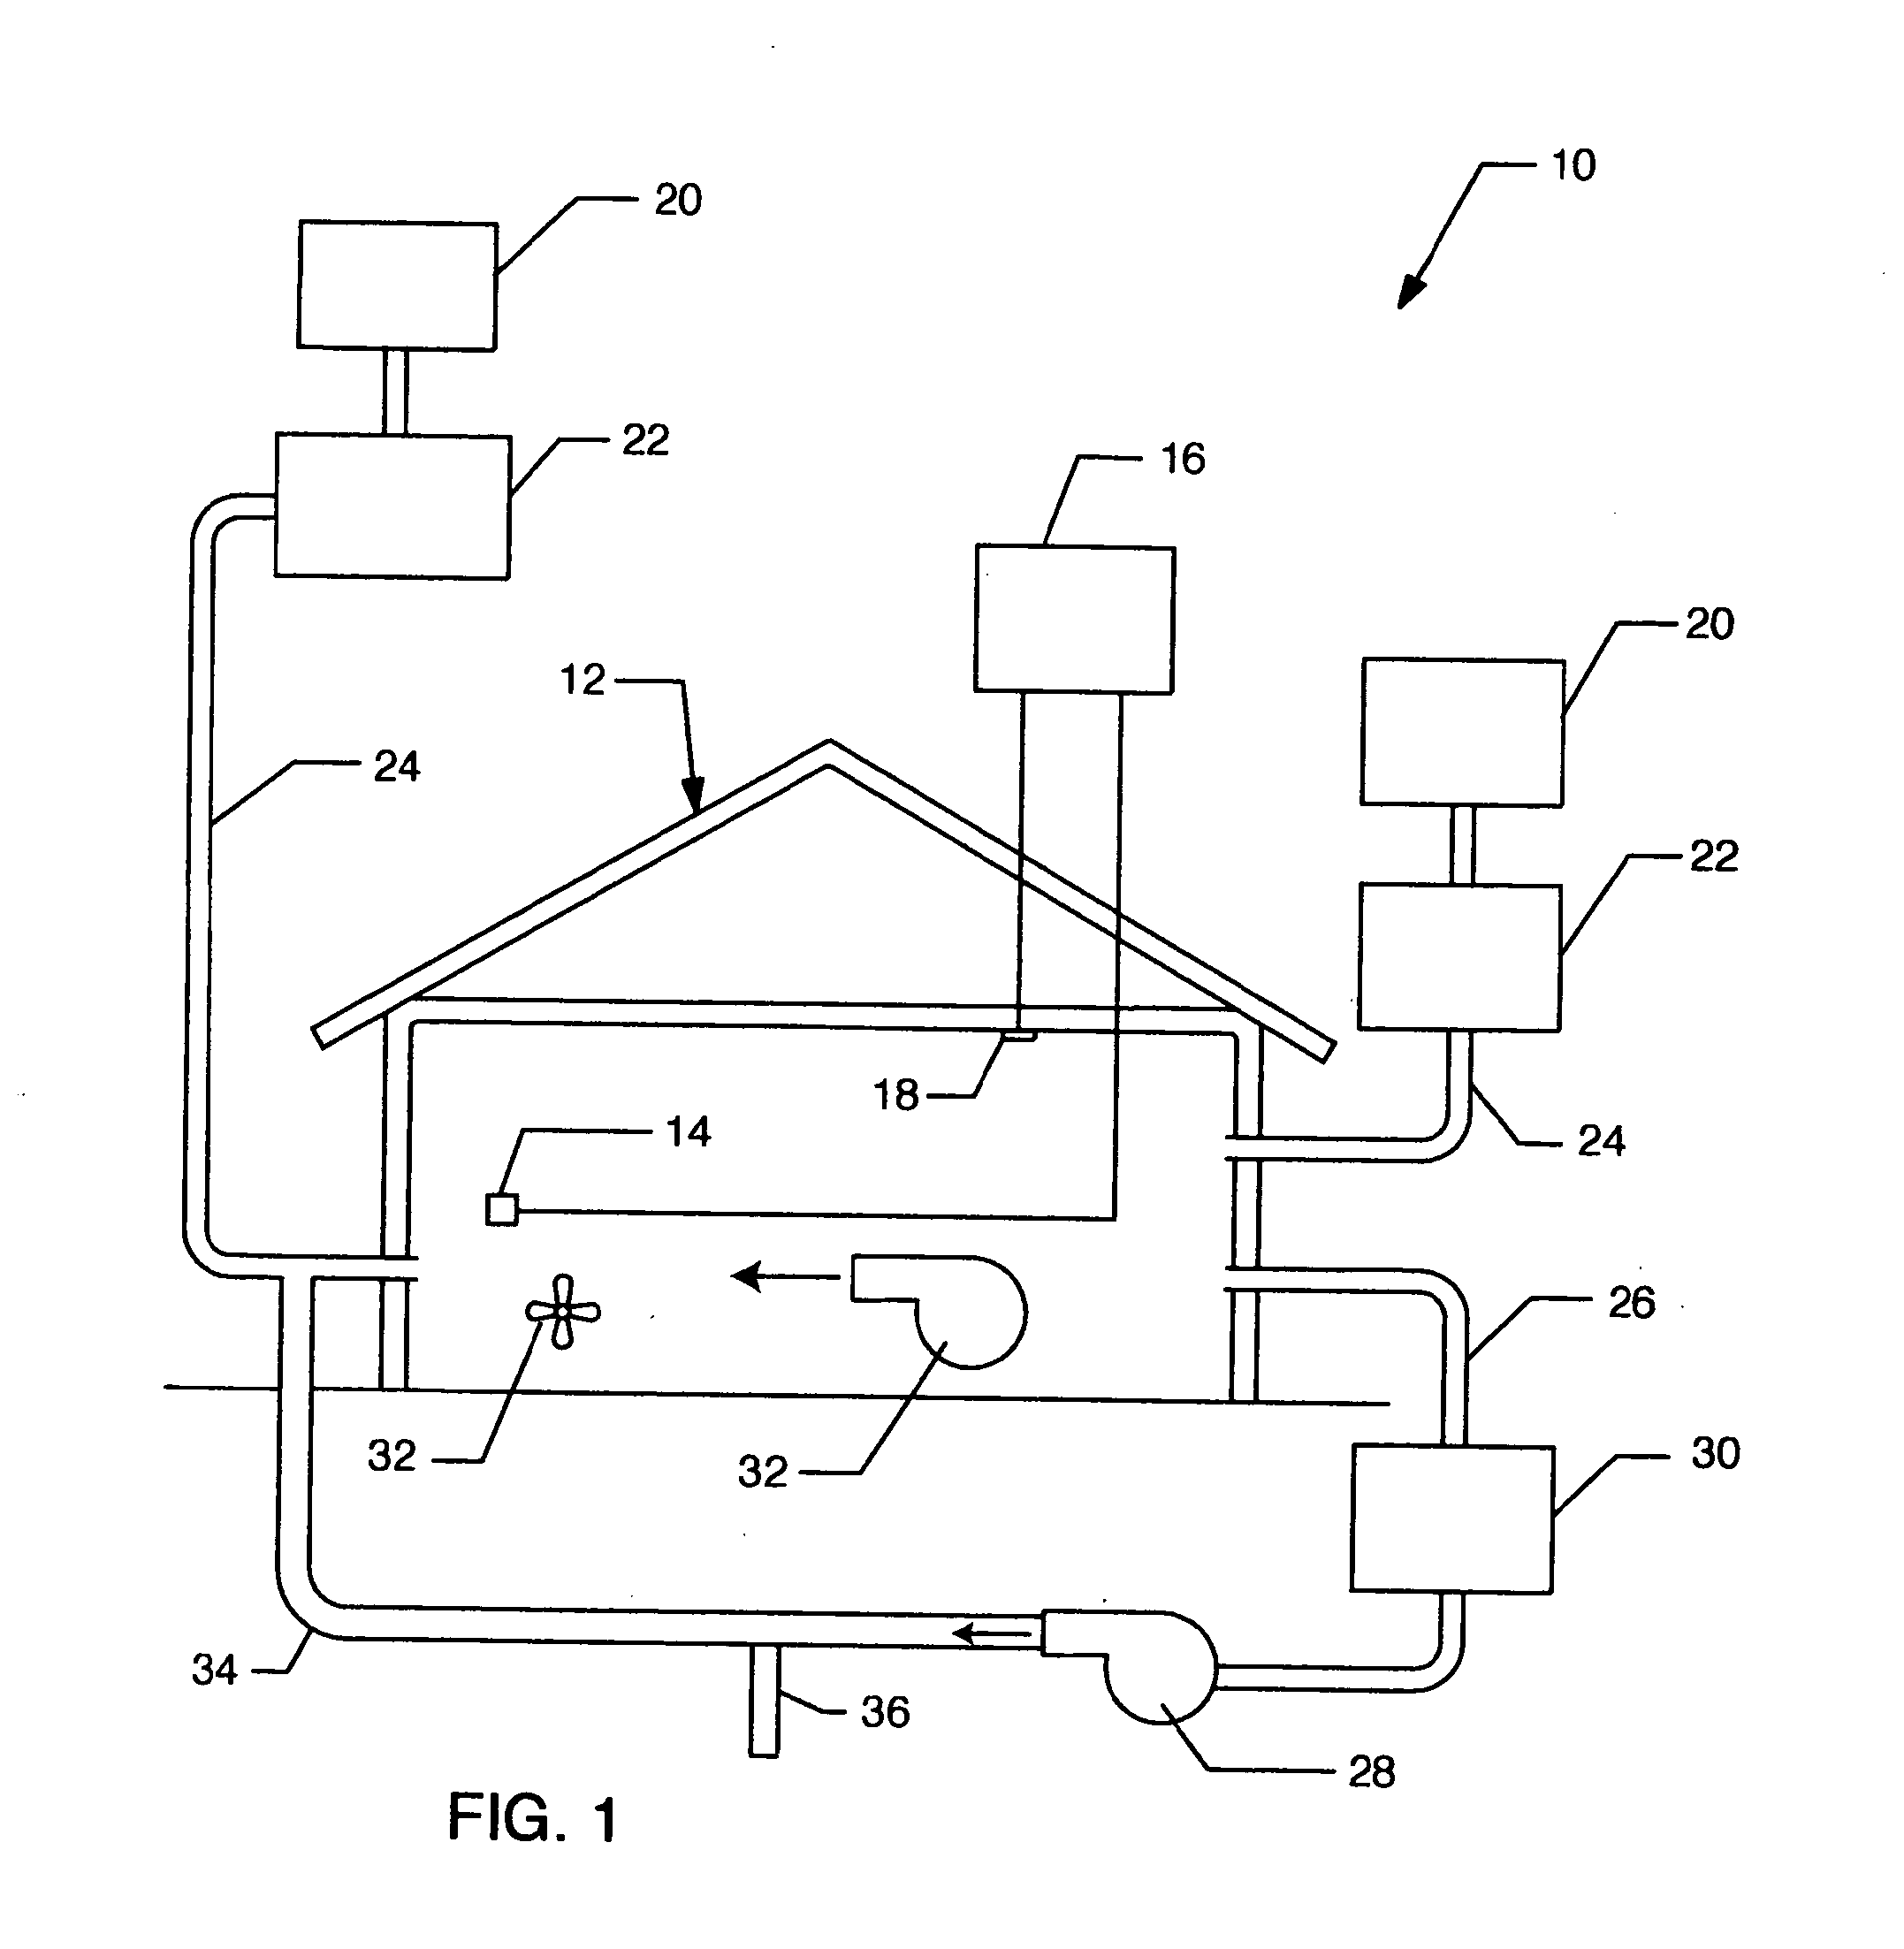 Method for removing or treating harmful biological and chemical substances within structures and enclosures